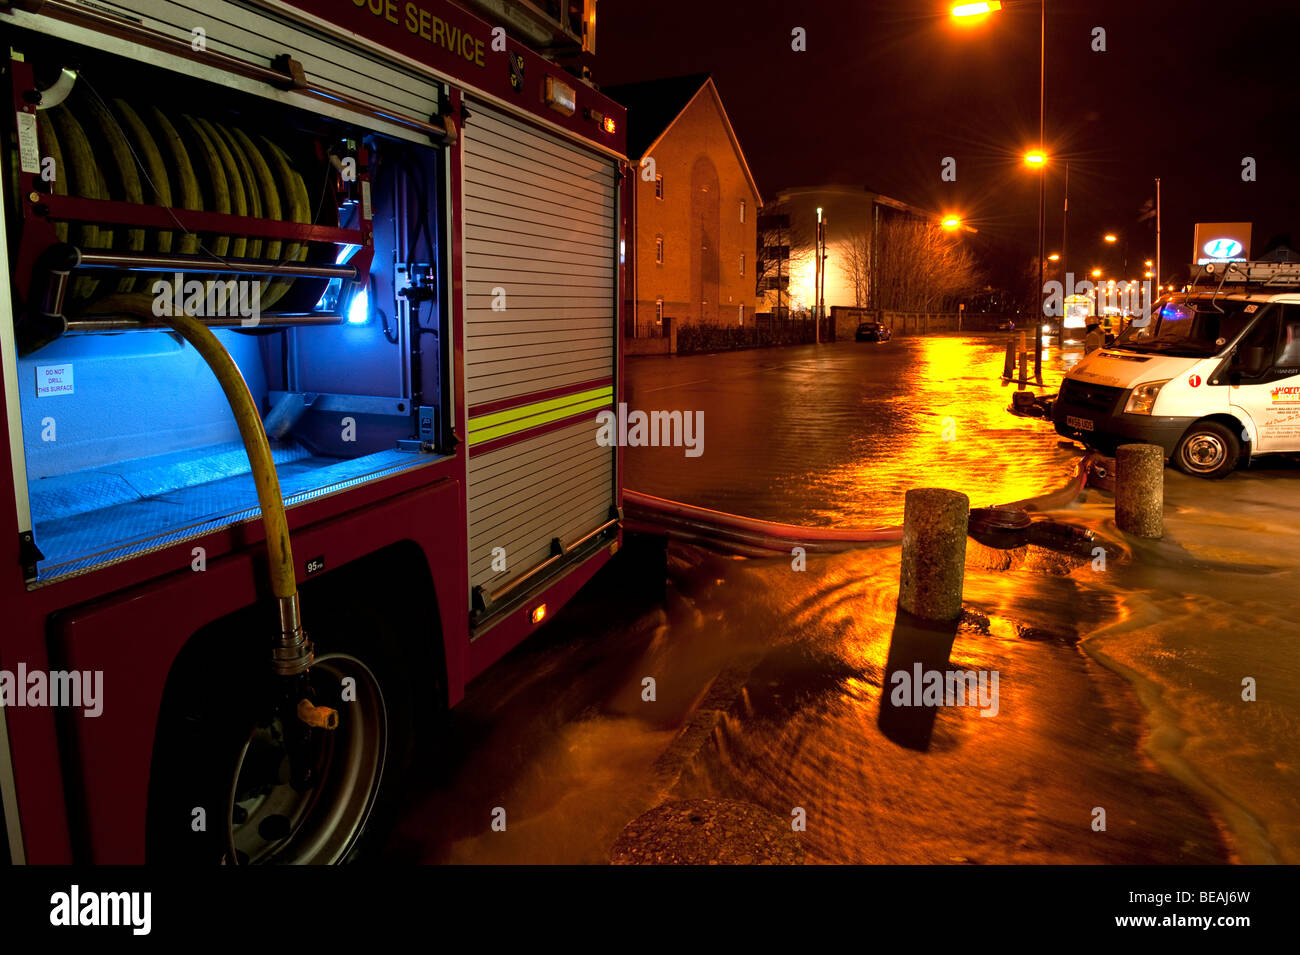 Fire engine at flooding incident at night Stock Photo